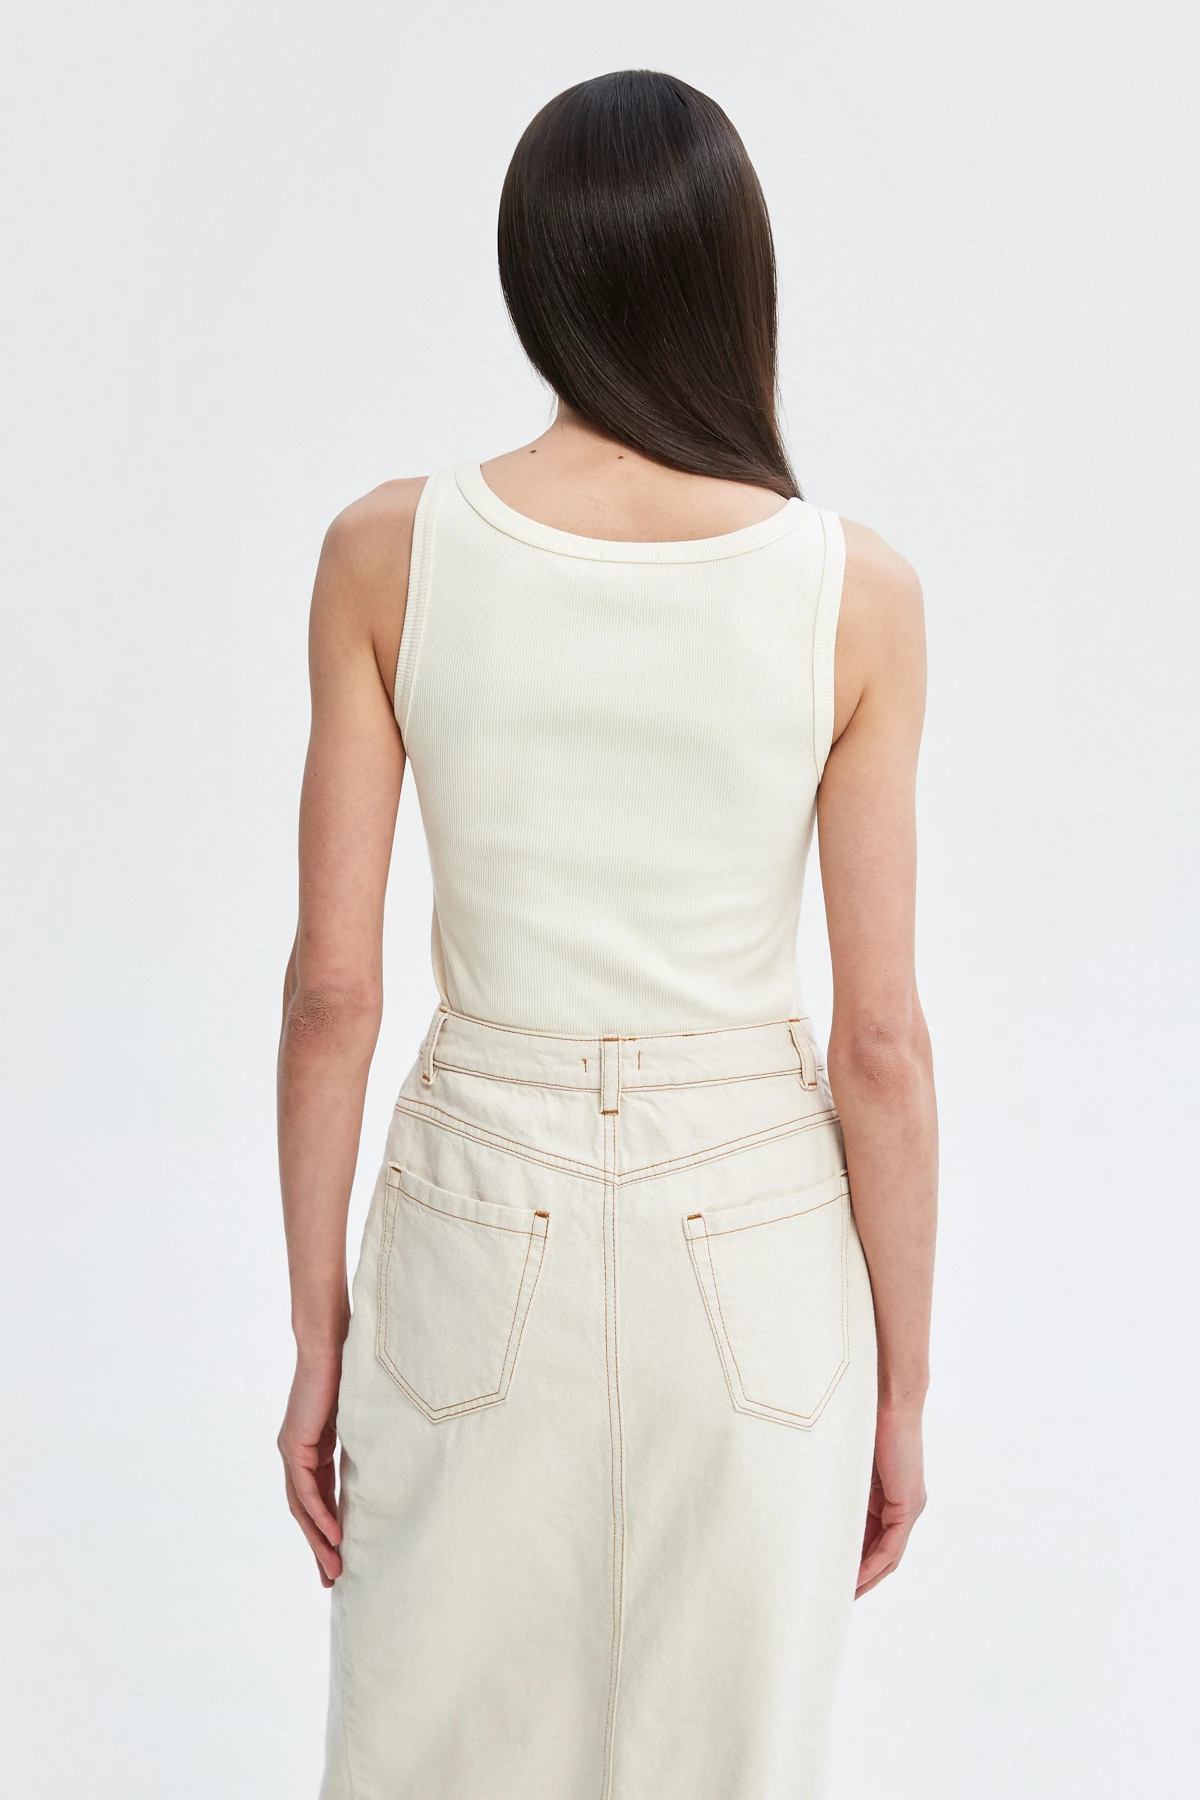 Milky cotton ribbed tank top with deep oval neckline, photo 3